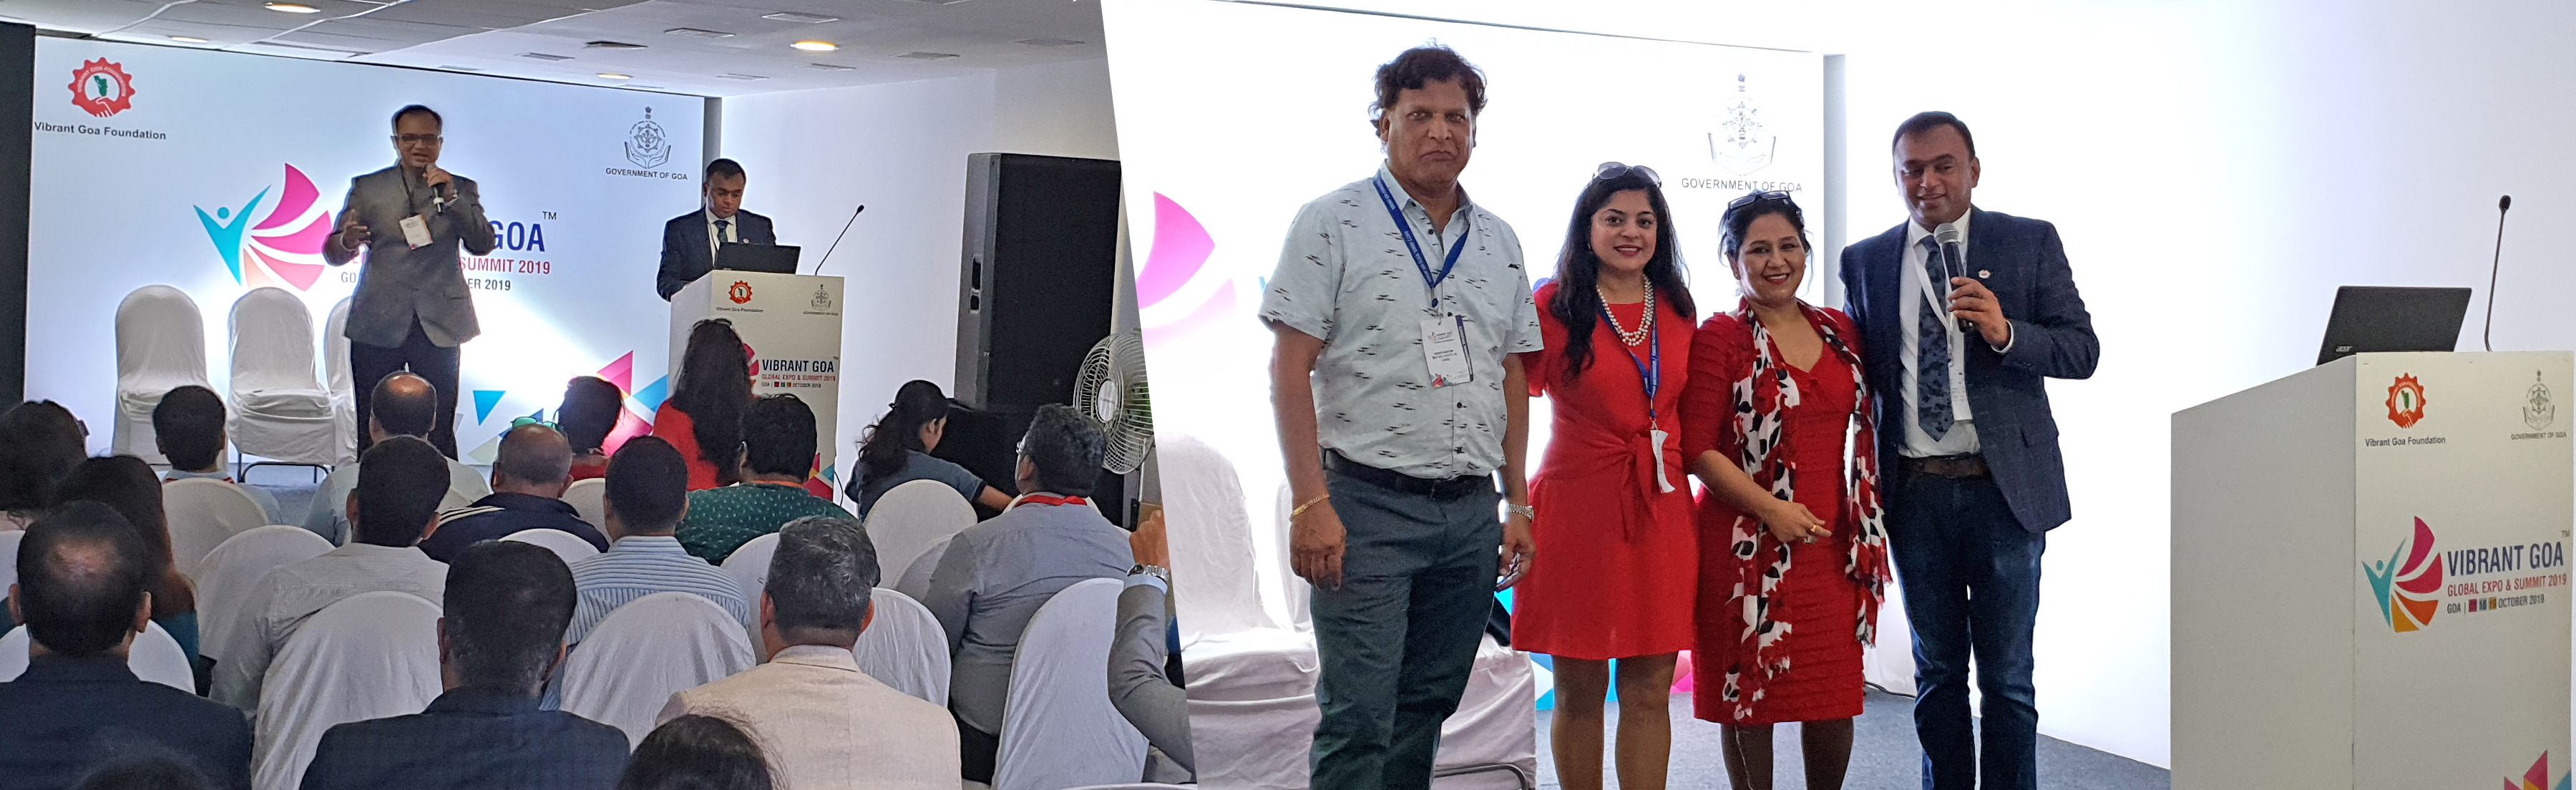 Tangentia | Tangentia at Vibrant Goa Global Expo and Summit 2019